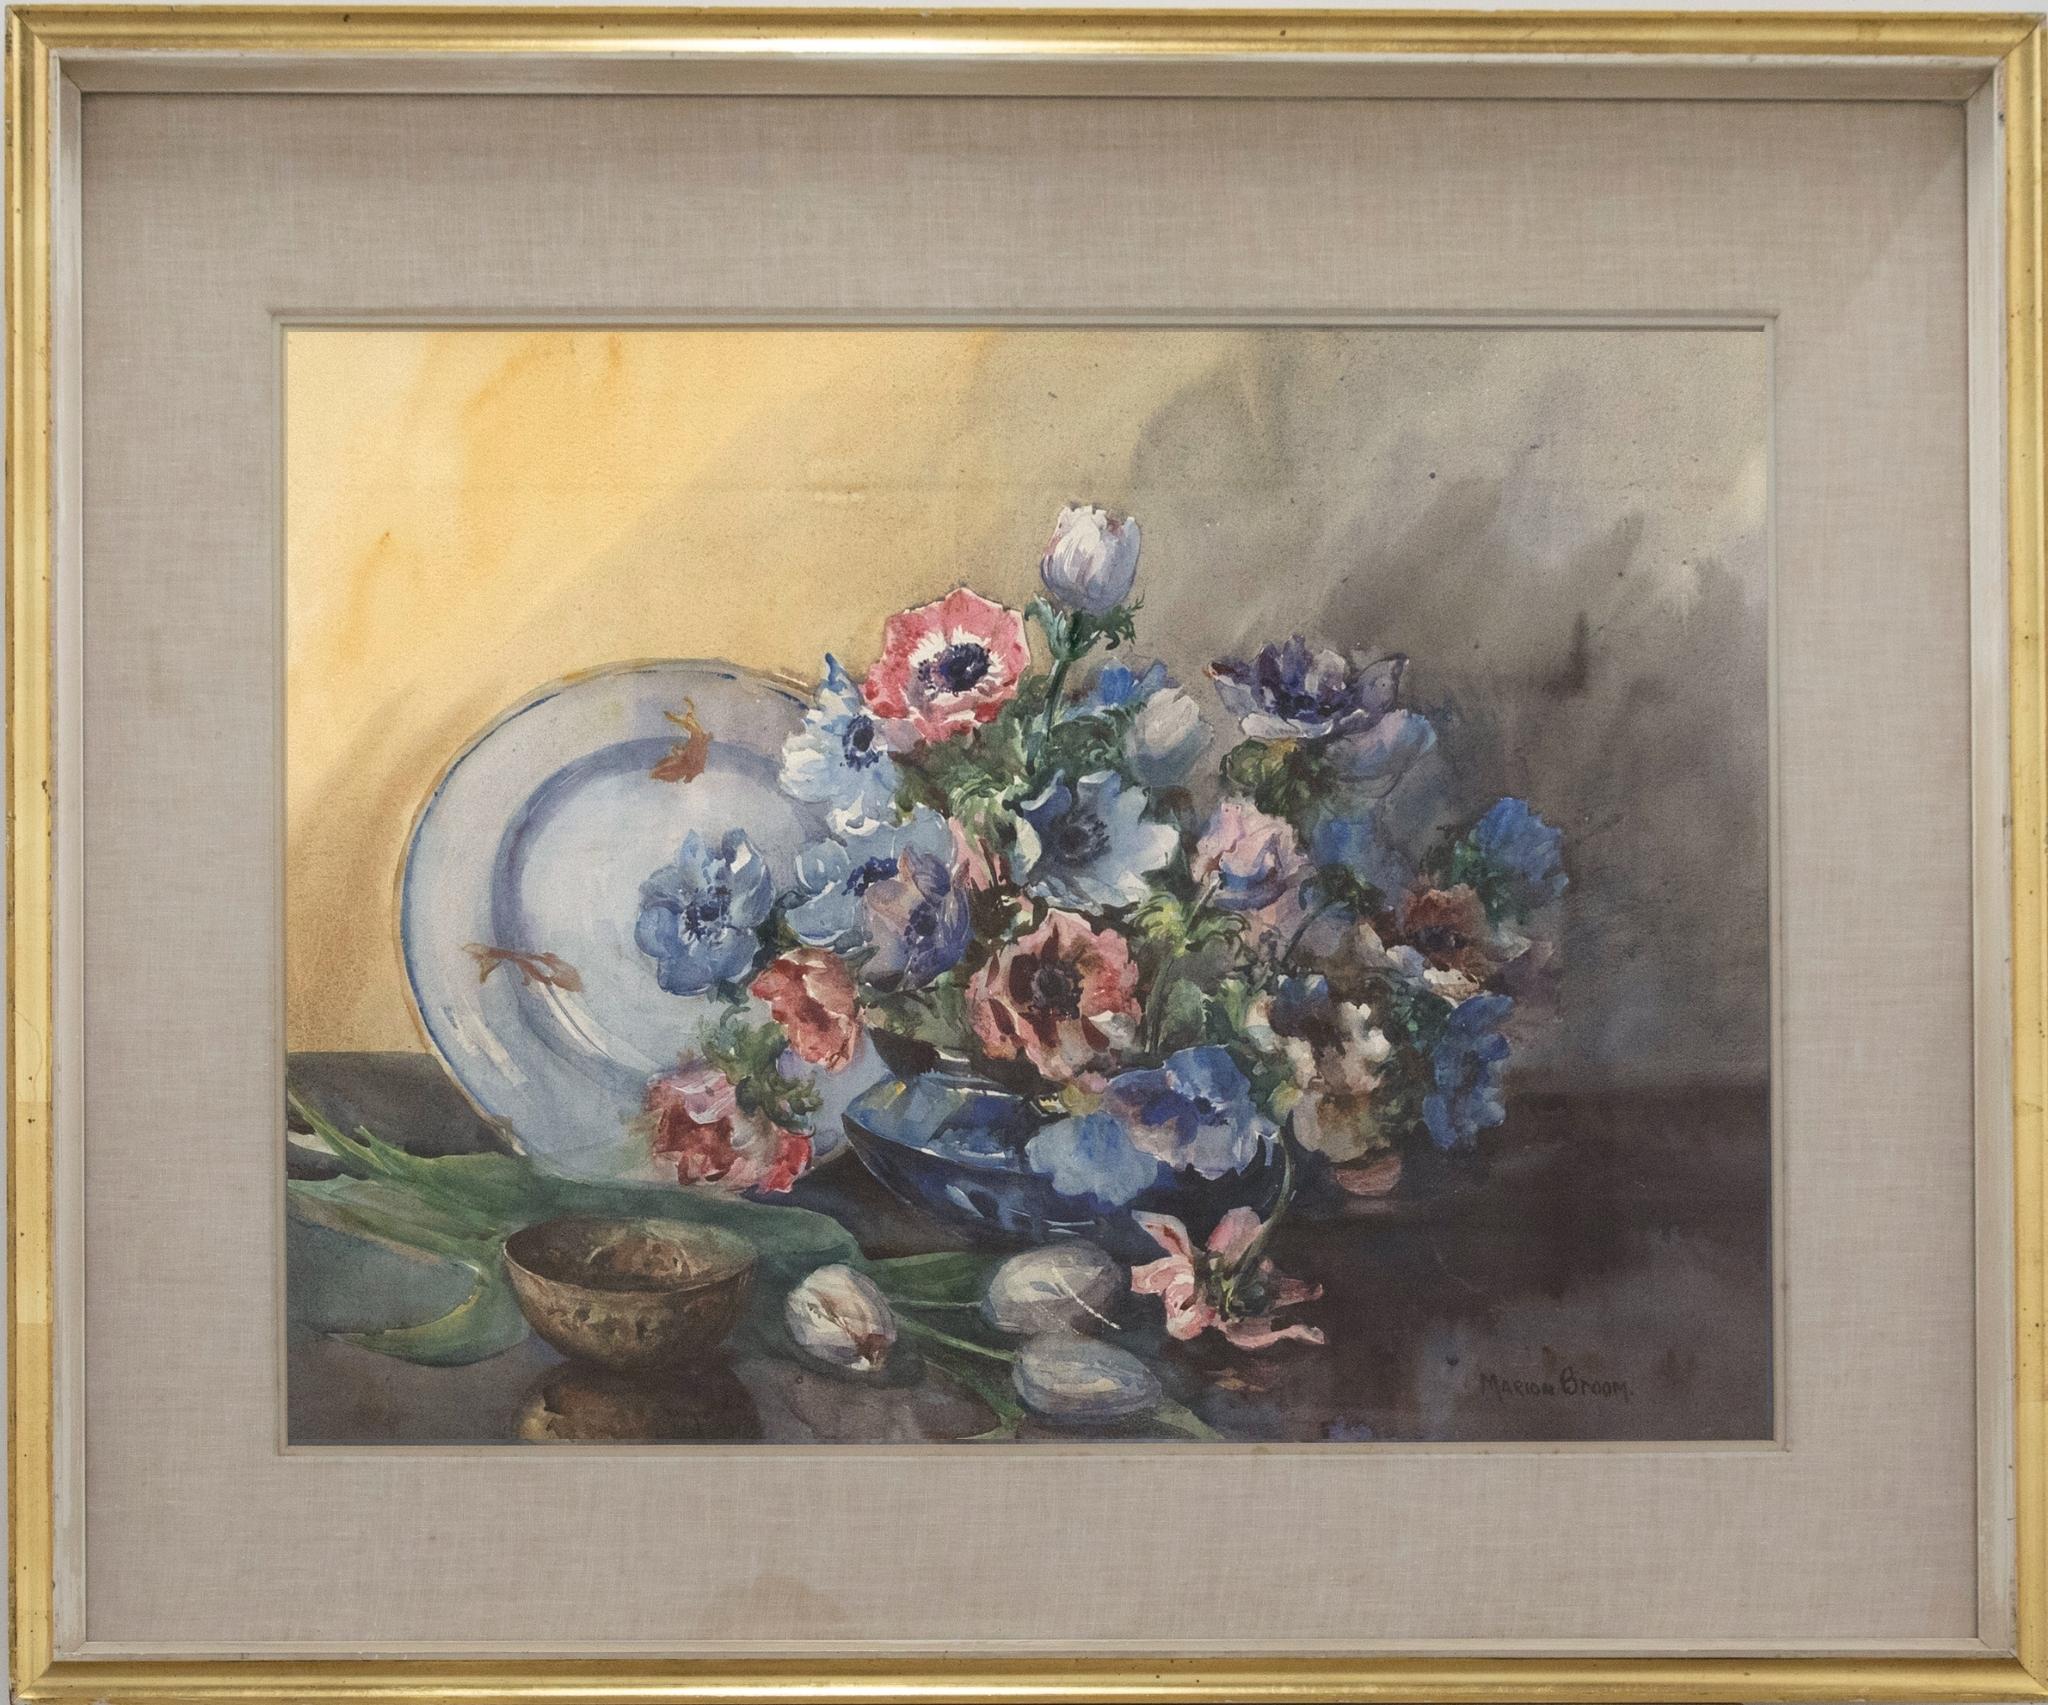 A fine floral watercolour showing a squat vase overflowing with colourful Anemones. A small bowl and a plate embellished with gold fish complete the still life. The artist has signed to the lower right corner and the painting has been presented in a